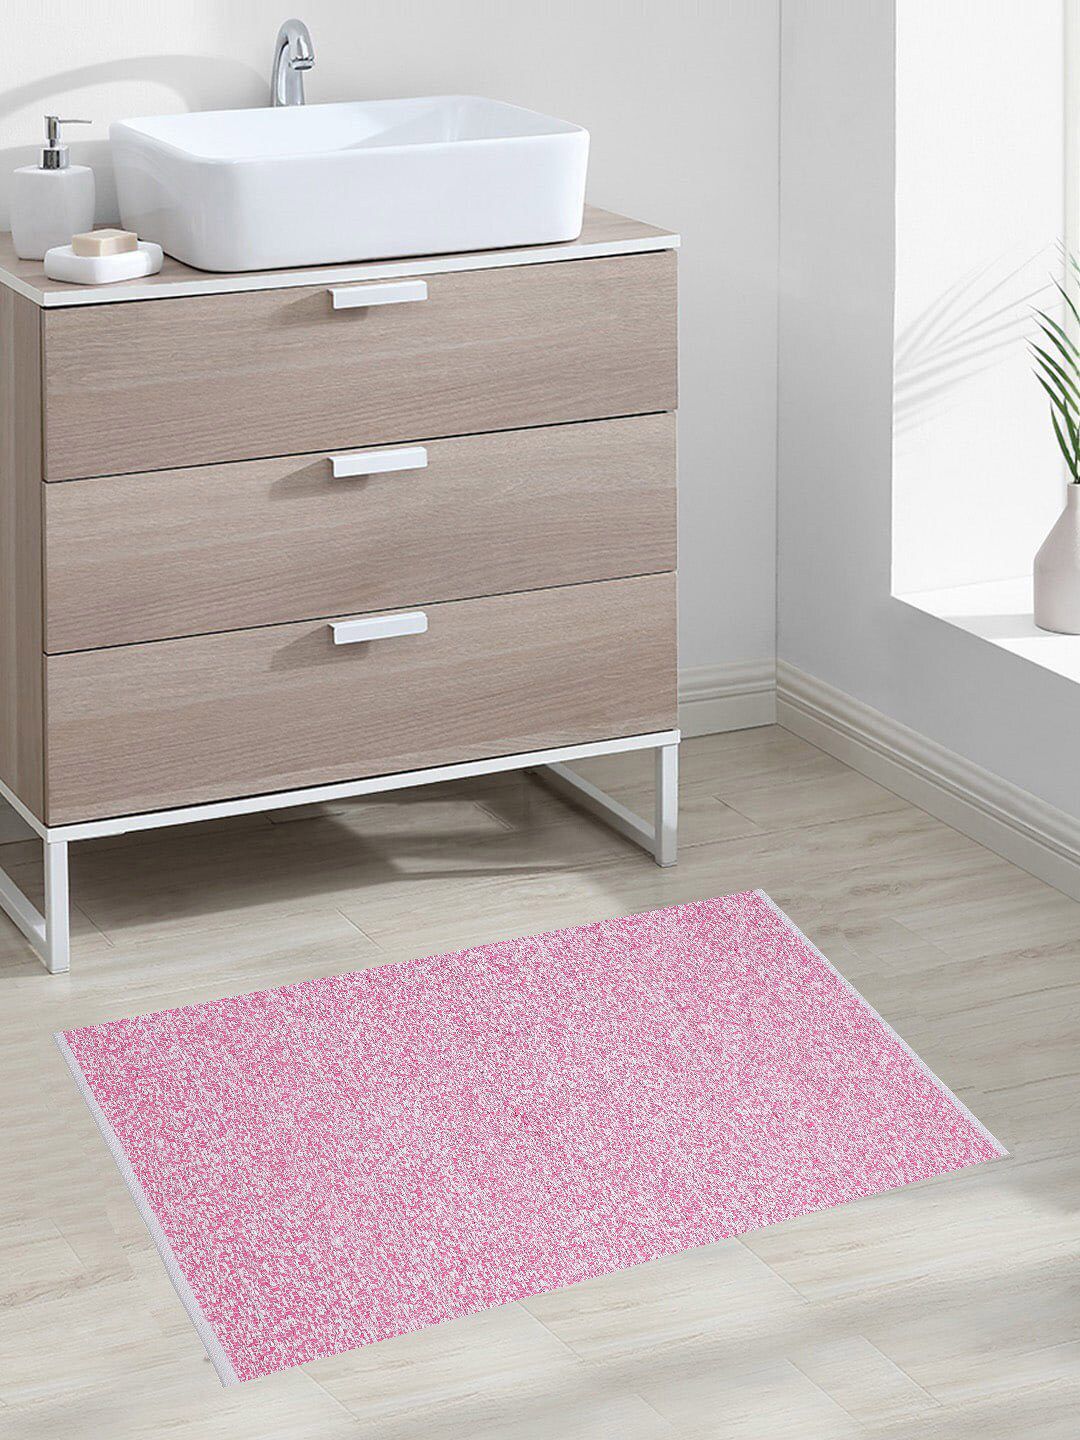 Oxolloxo Pink & White Printed Cotton Rectangle Floor Rug Price in India